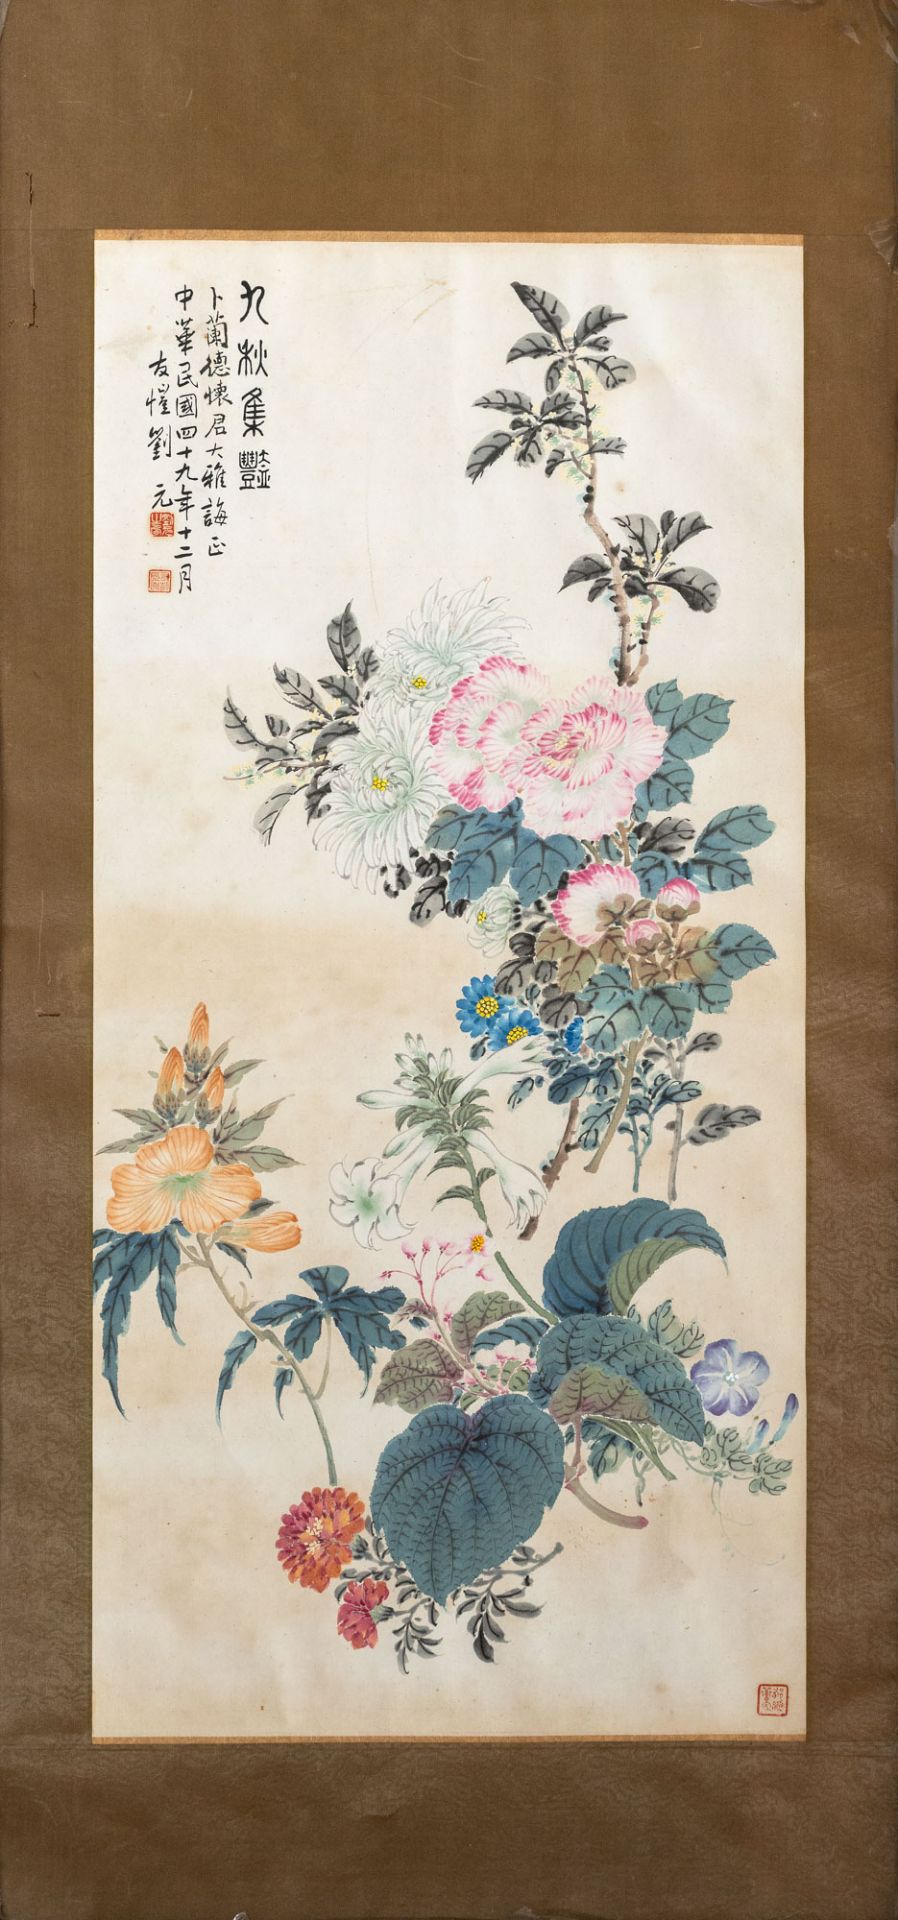 Yuan Lin (b. 1914), Flowers - In honor of the 49th Year of the Republic, China, 1949